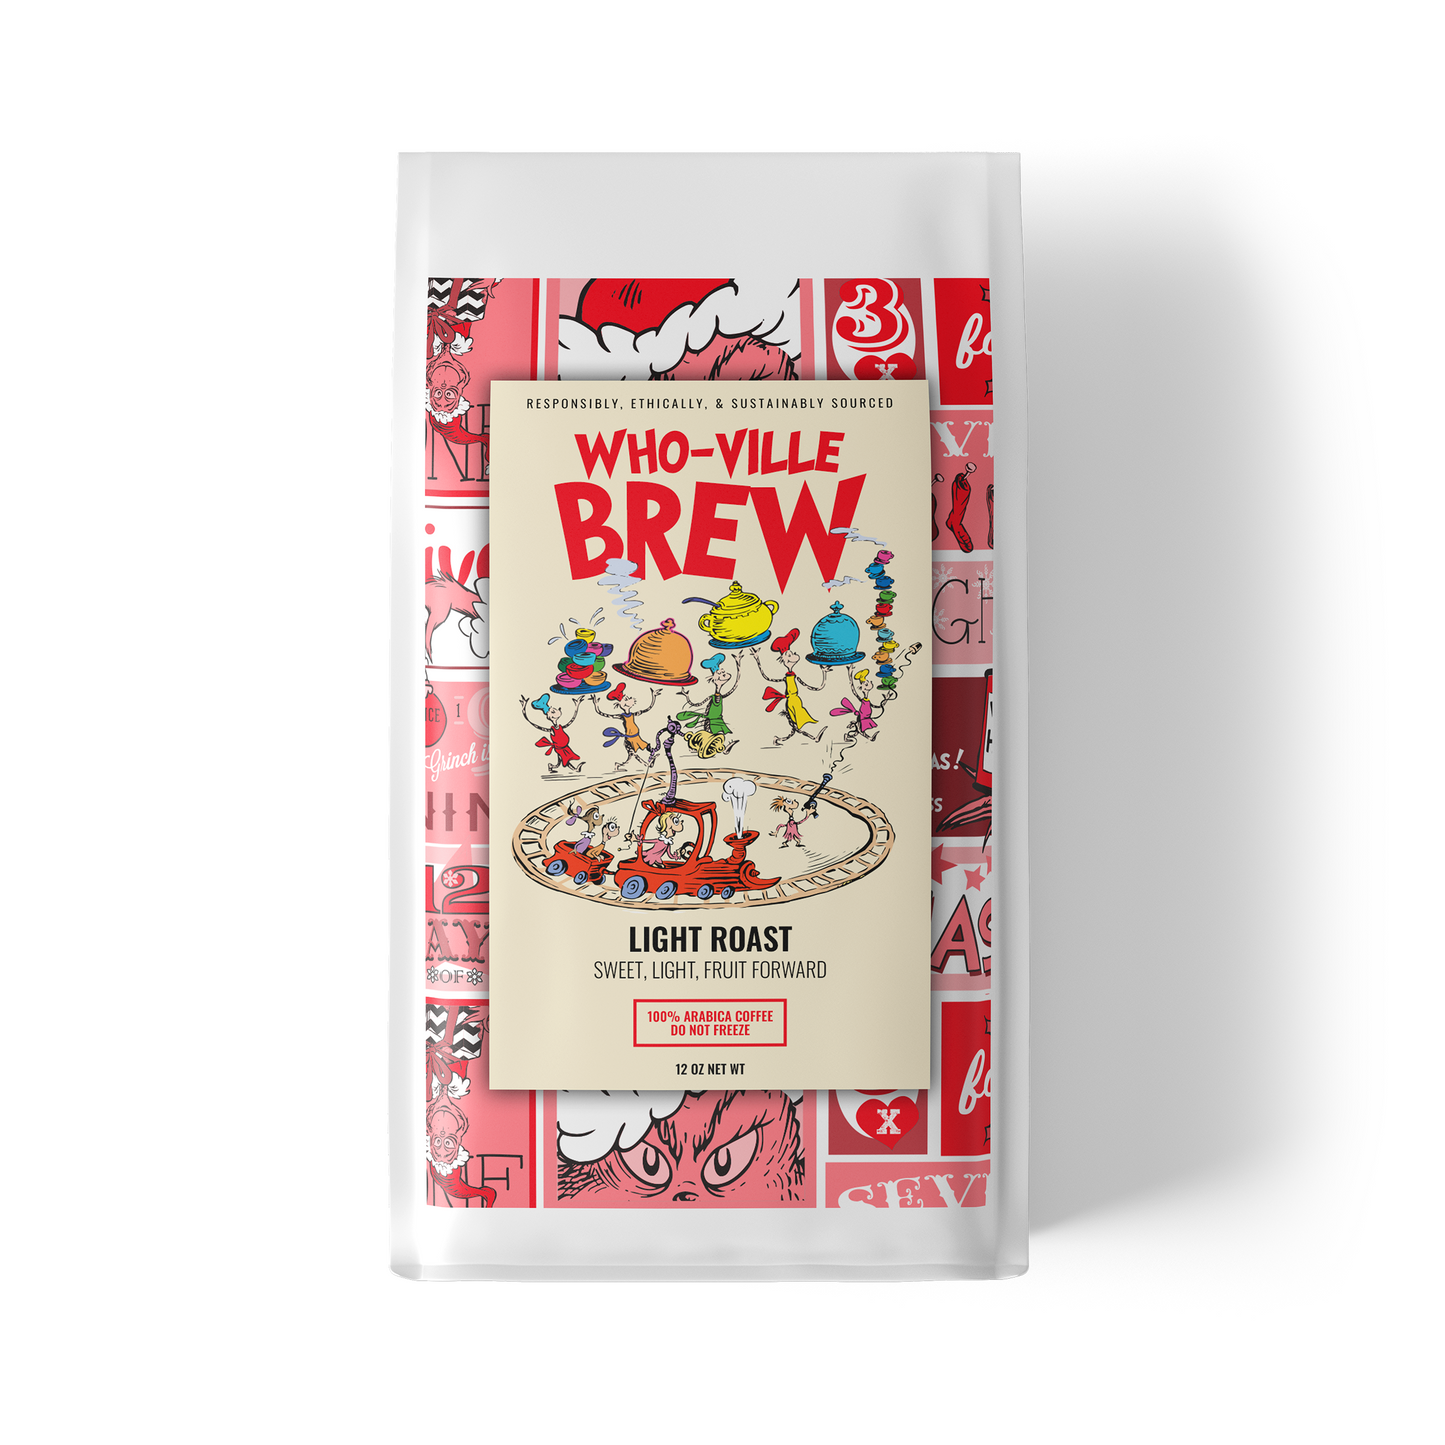 Grinch Coffee 5-Pack